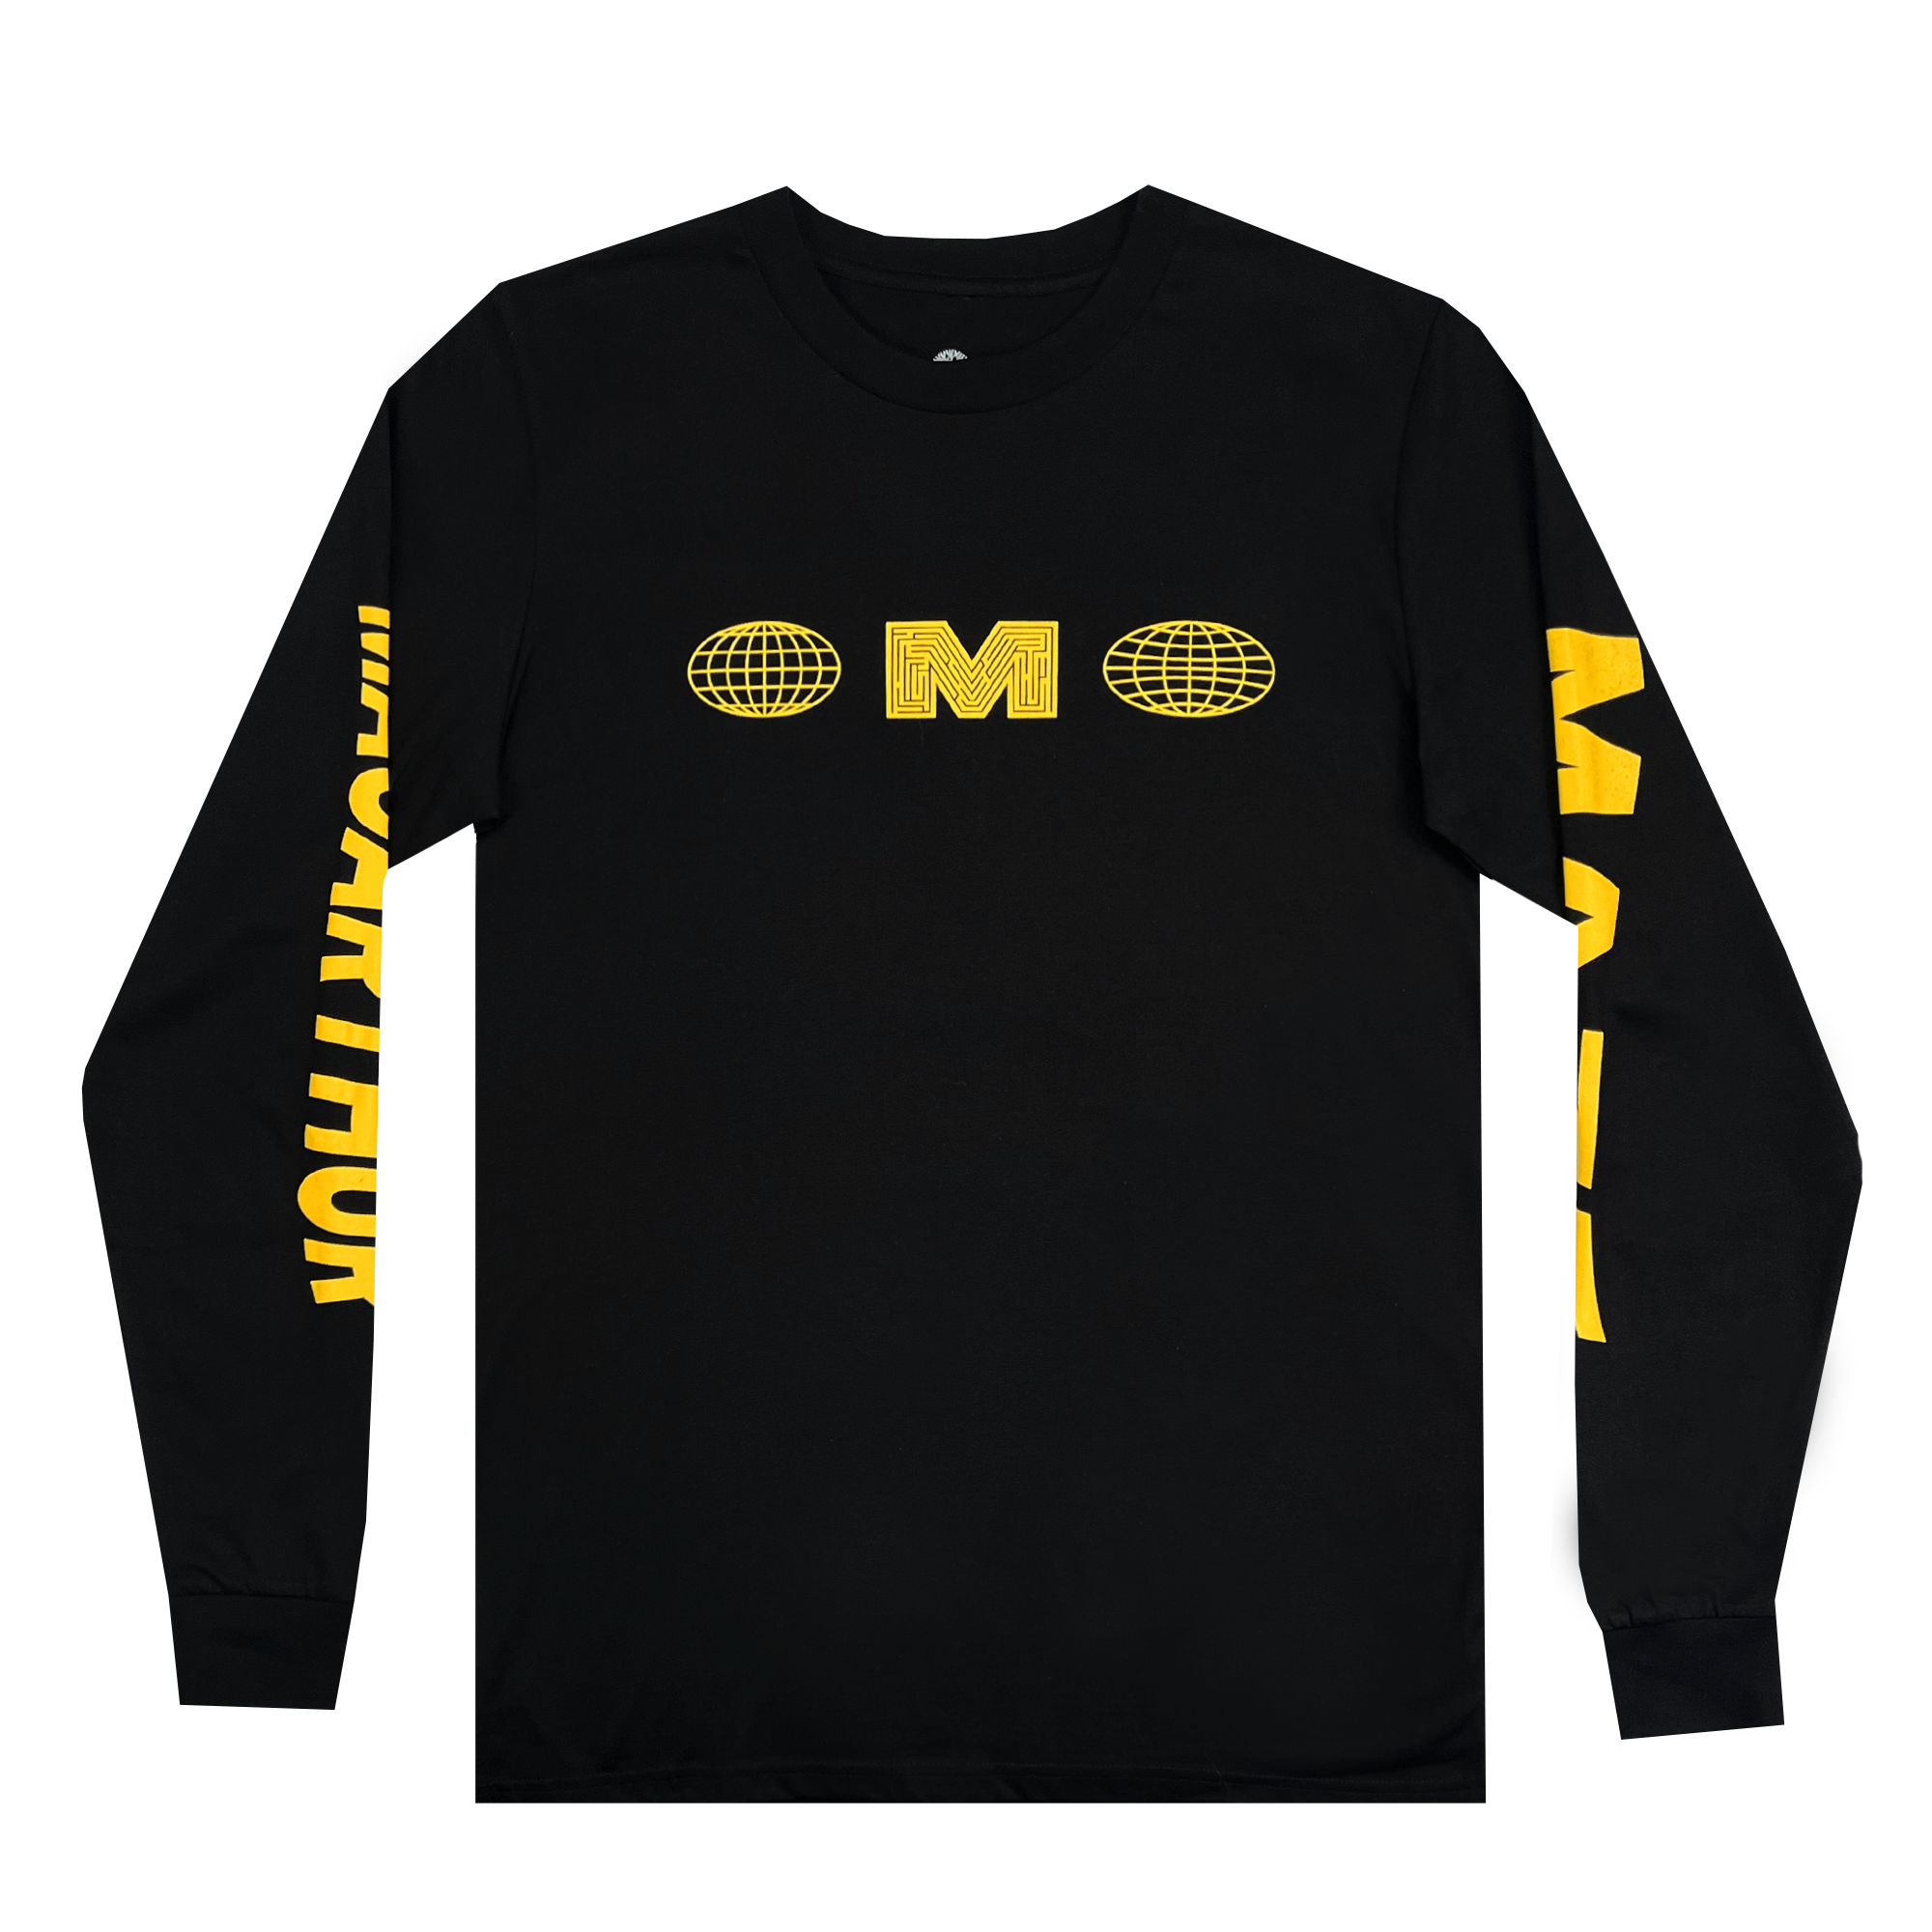 Front view of long sleeve black t-shirt with yellow Macarthur Maze logo centered on chest.